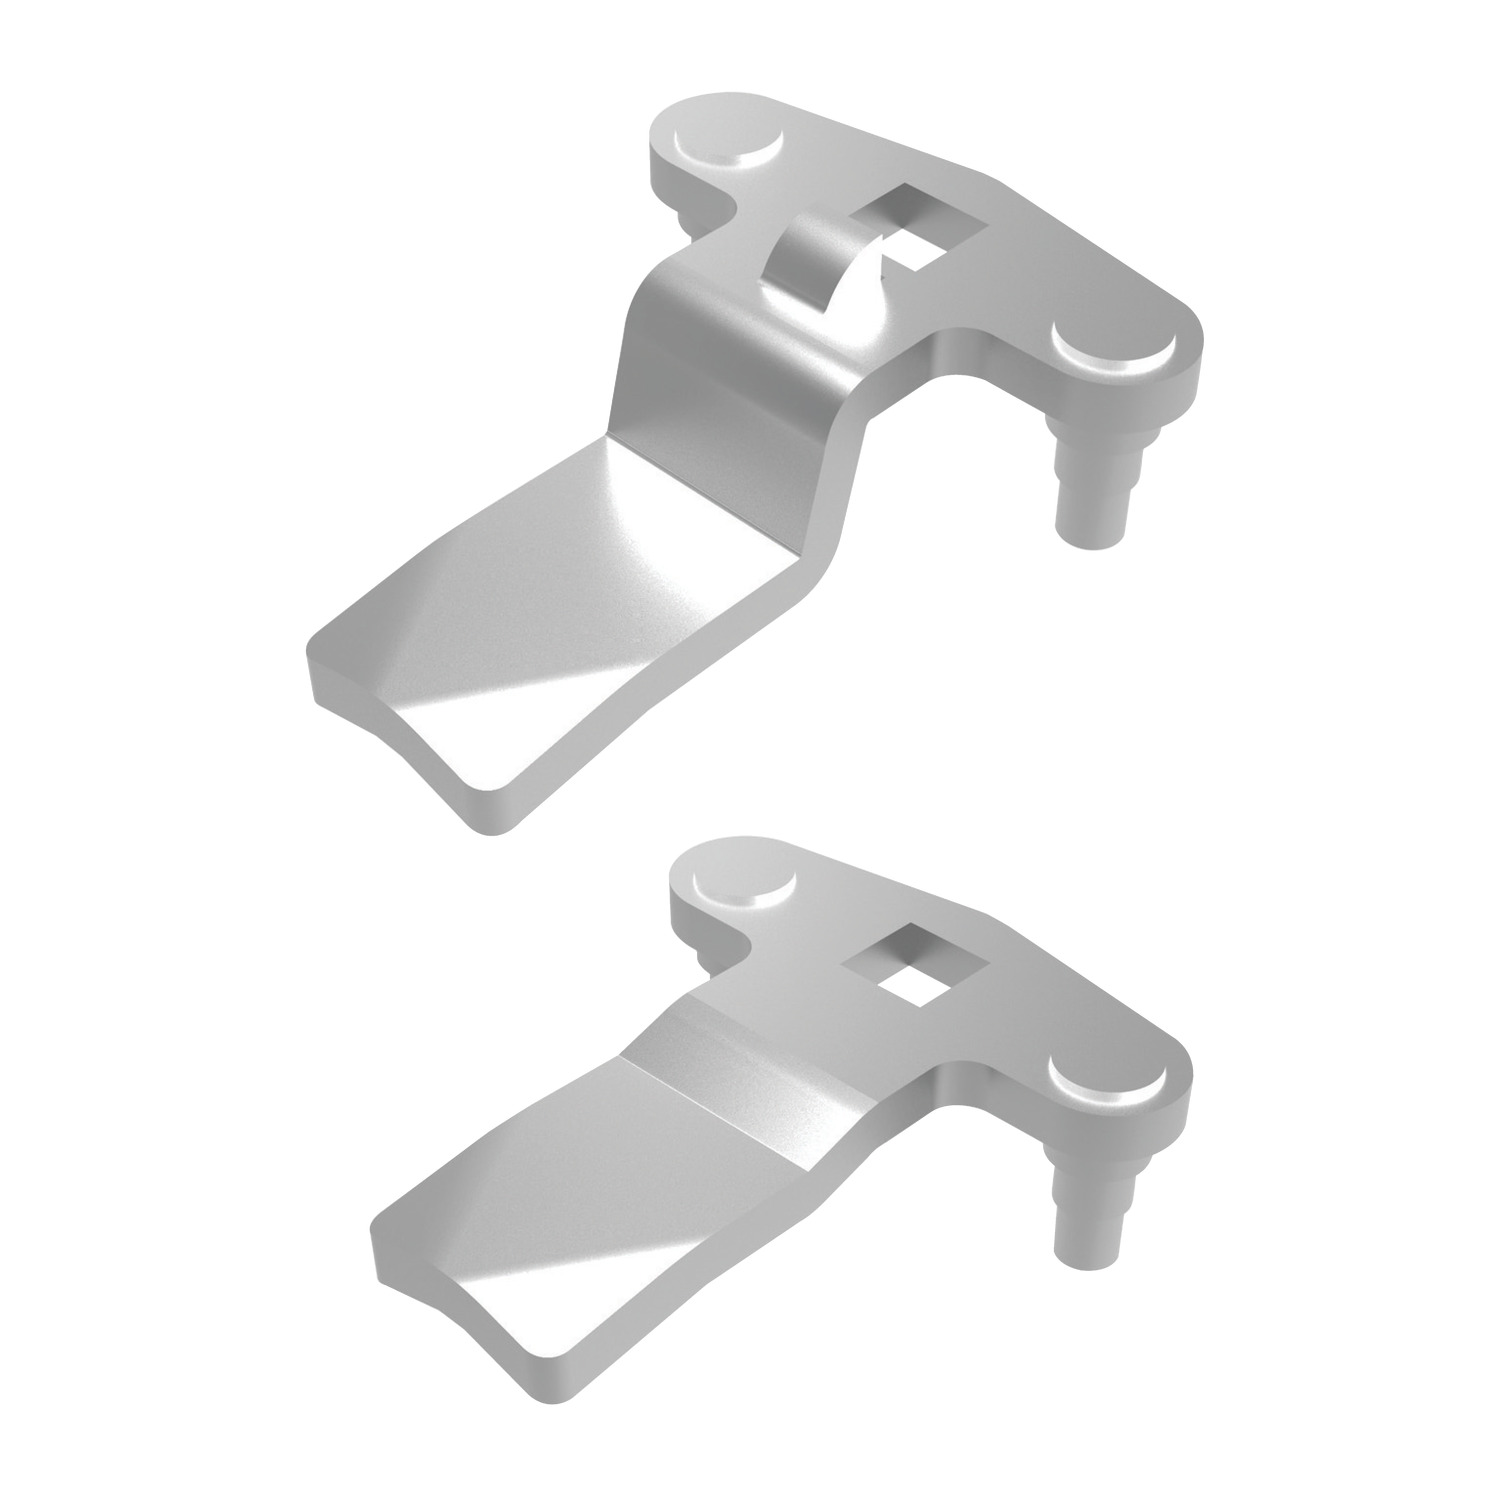 A0240.AW0004 Two Point Cams Flexi for 3-point latching - Steel, zinc plated - With Projection